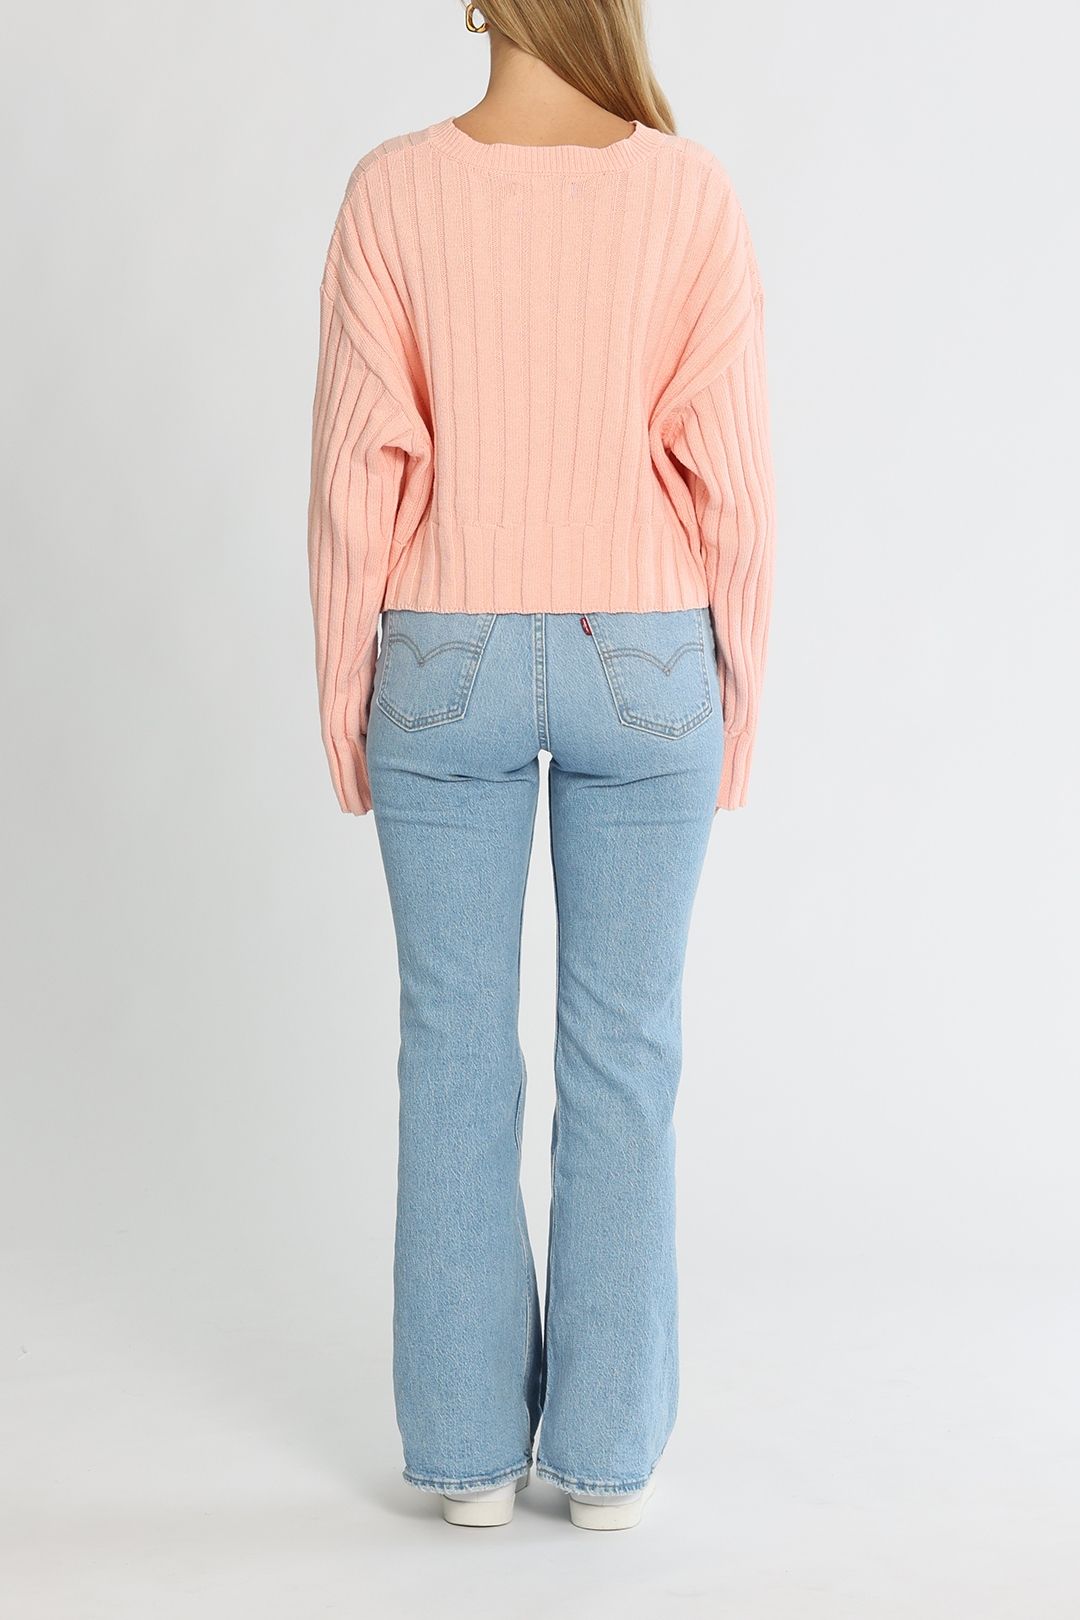 Nude Lucy Montana Knit Guava Crew 